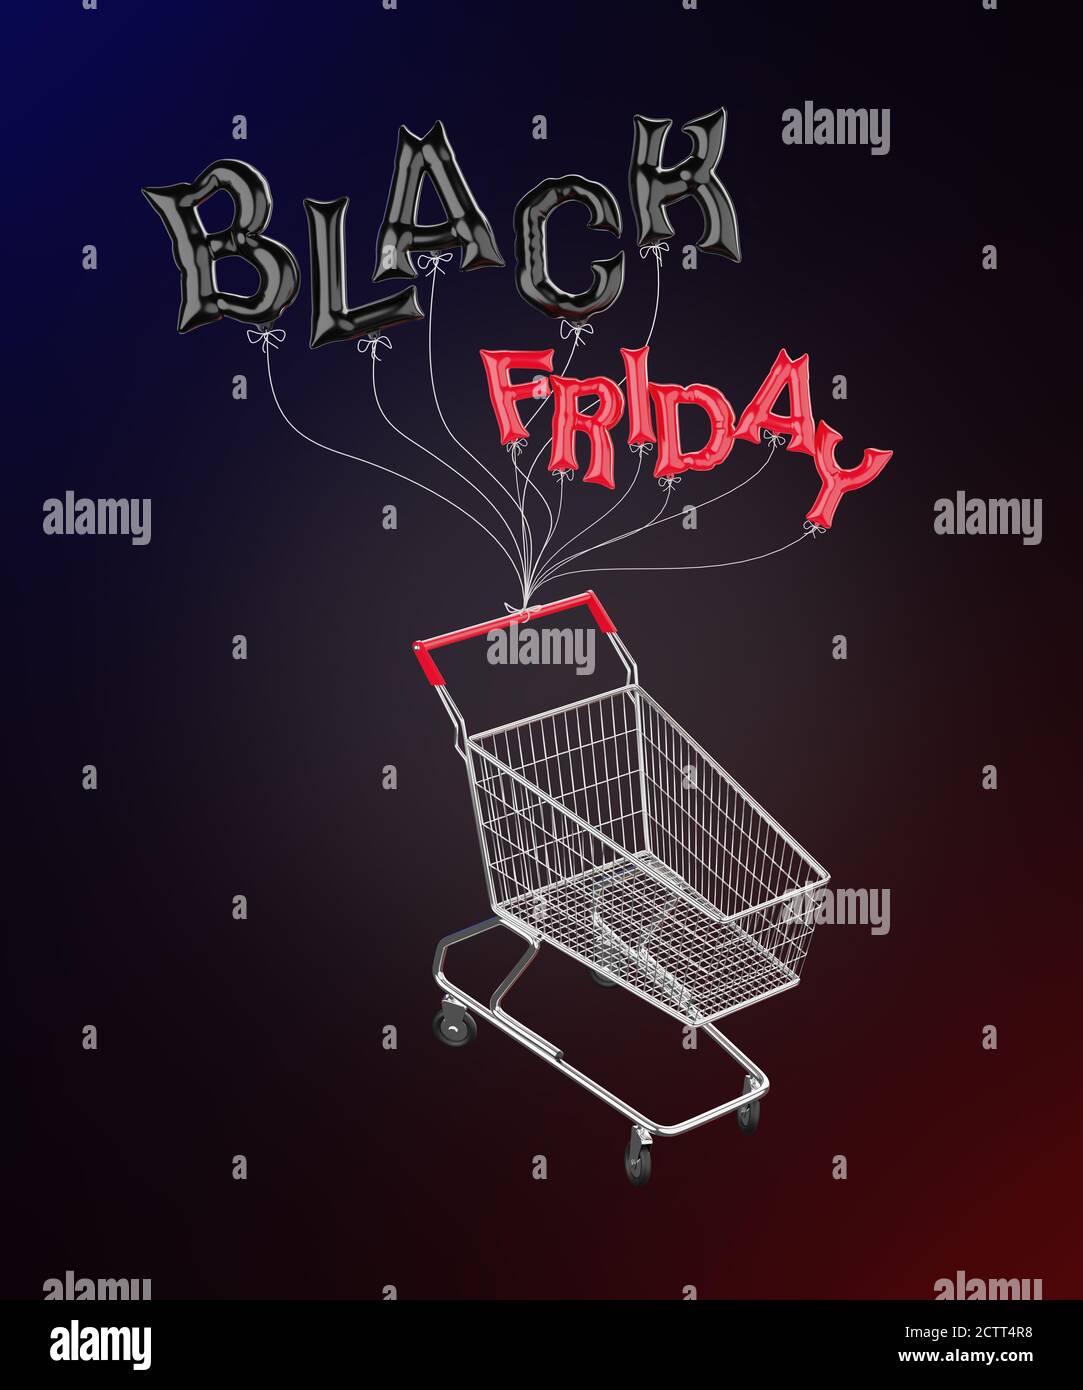 Balloons in the shape of the letters 'Black Friday' is tied to a shopping cart and are floating in a black background. Concept of the shopping season Stock Photo